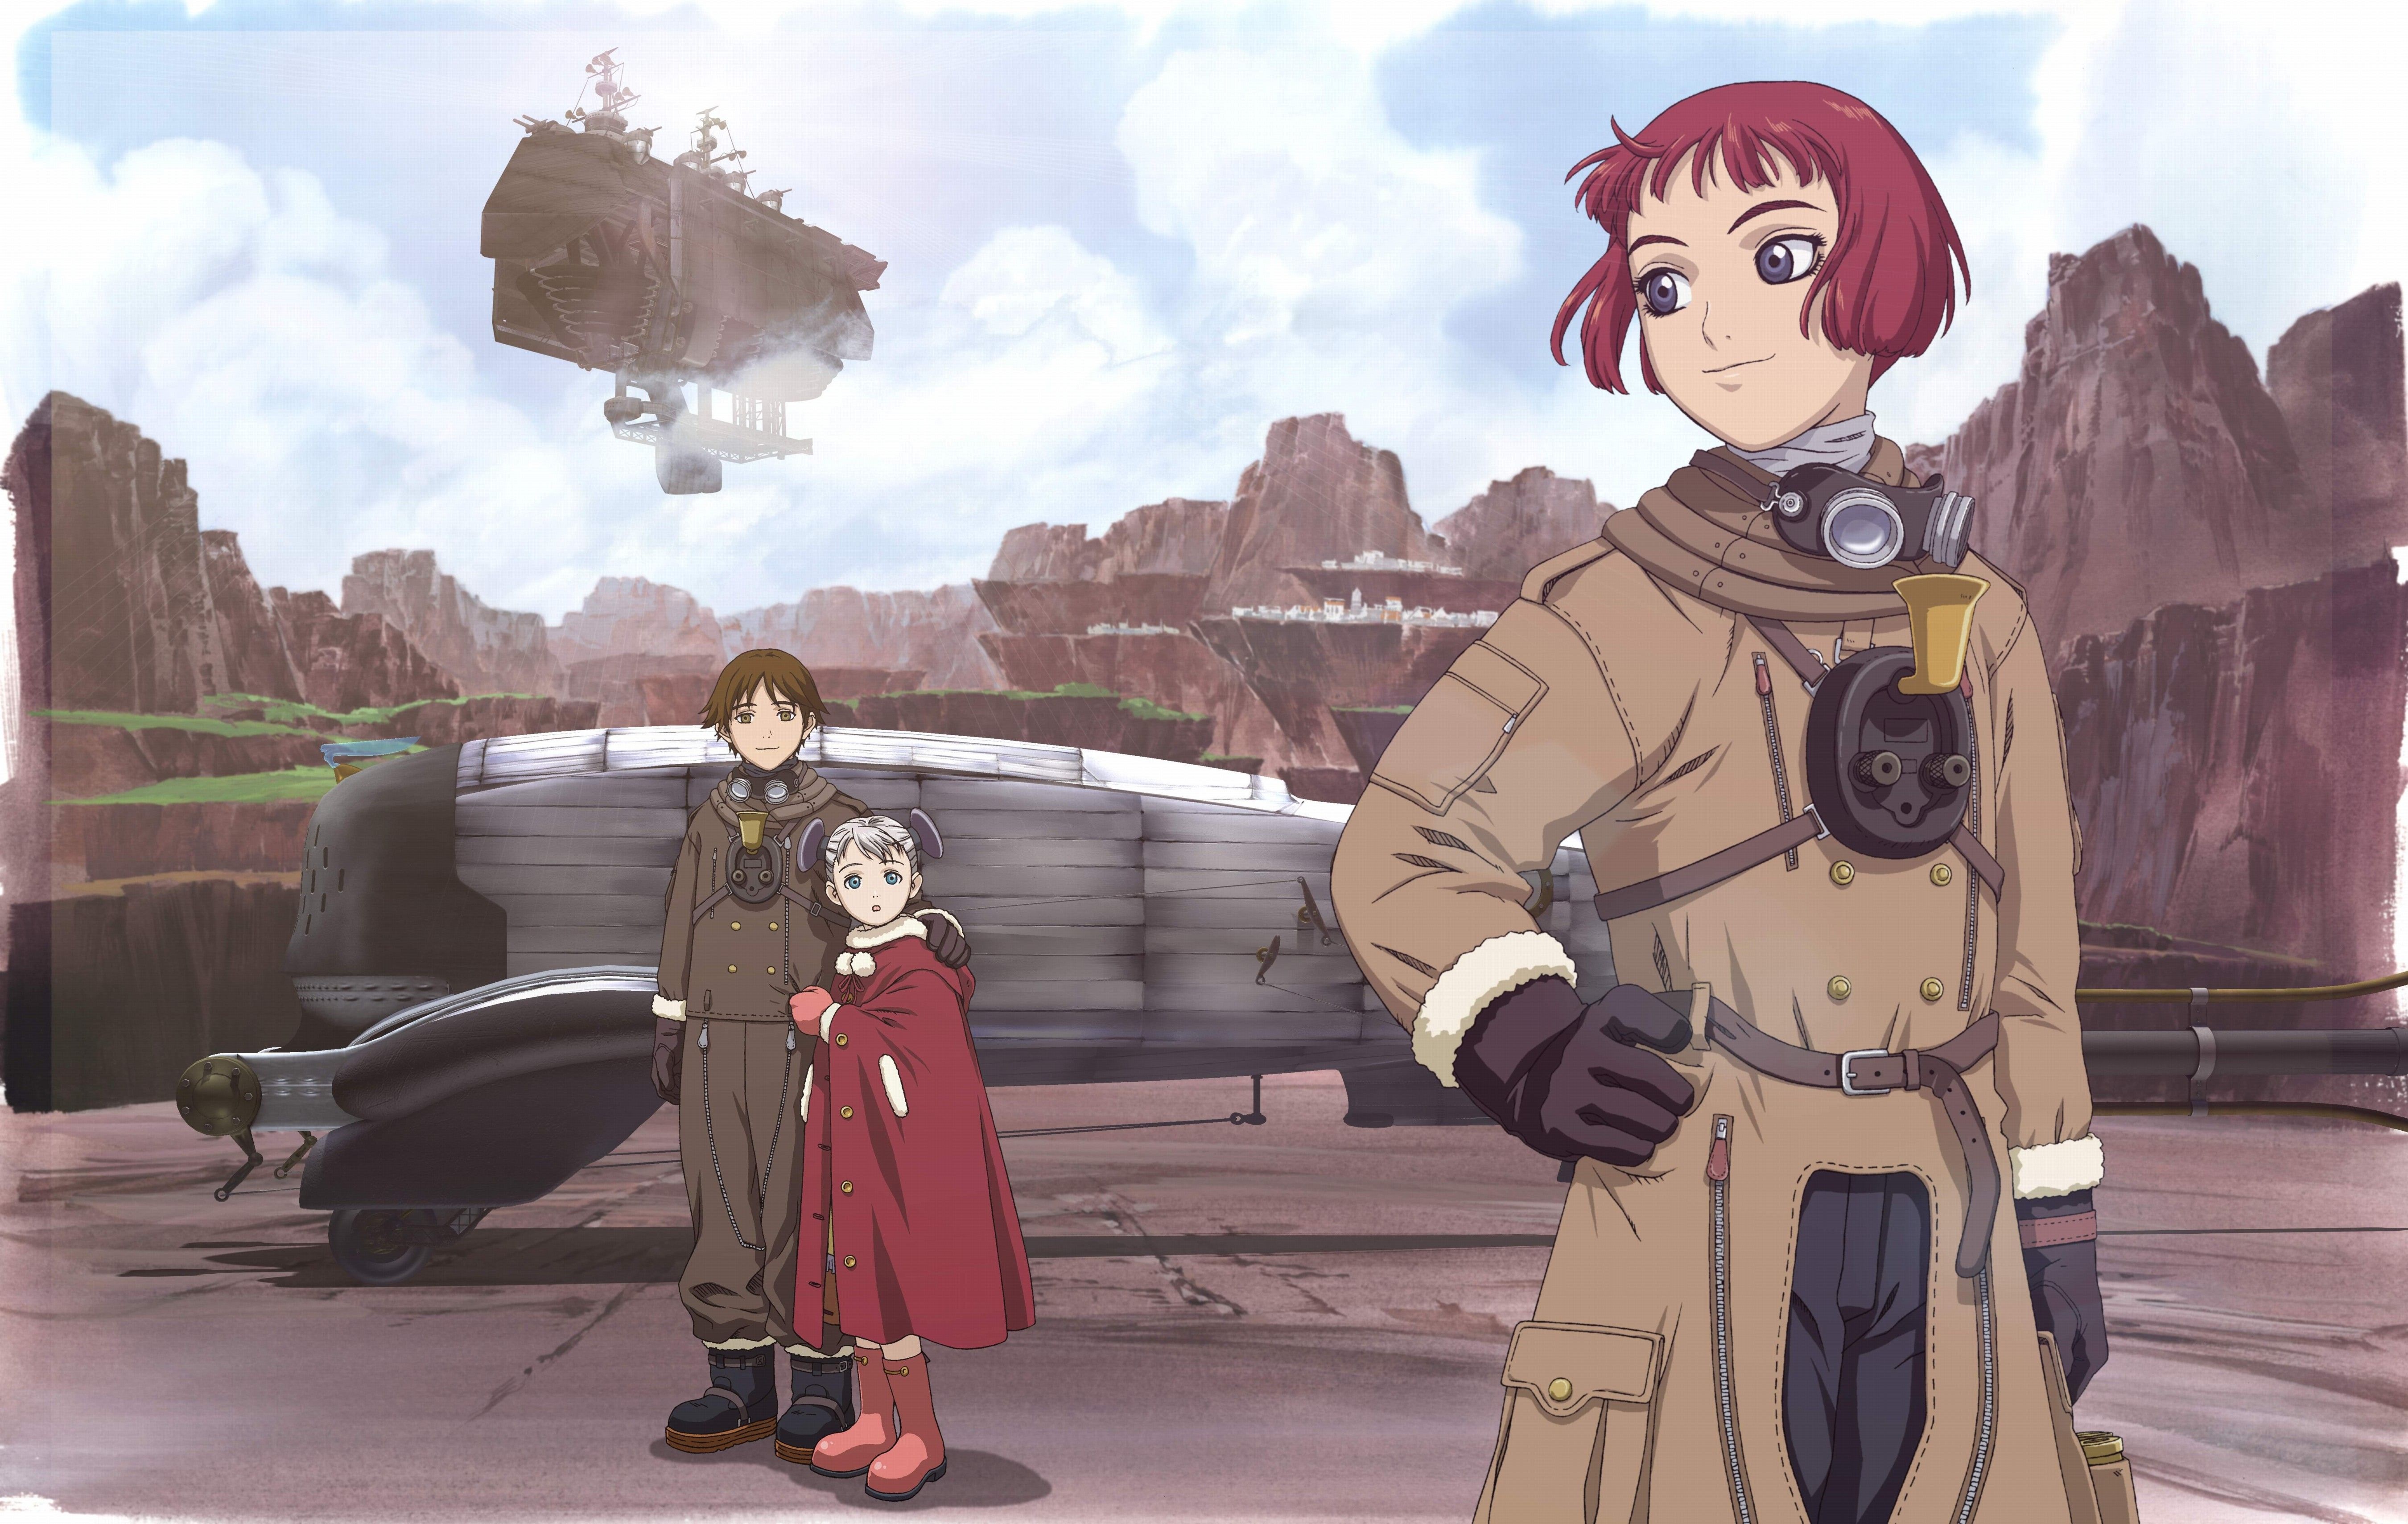 In the Last Exile, aircrafts are a common means of transport.